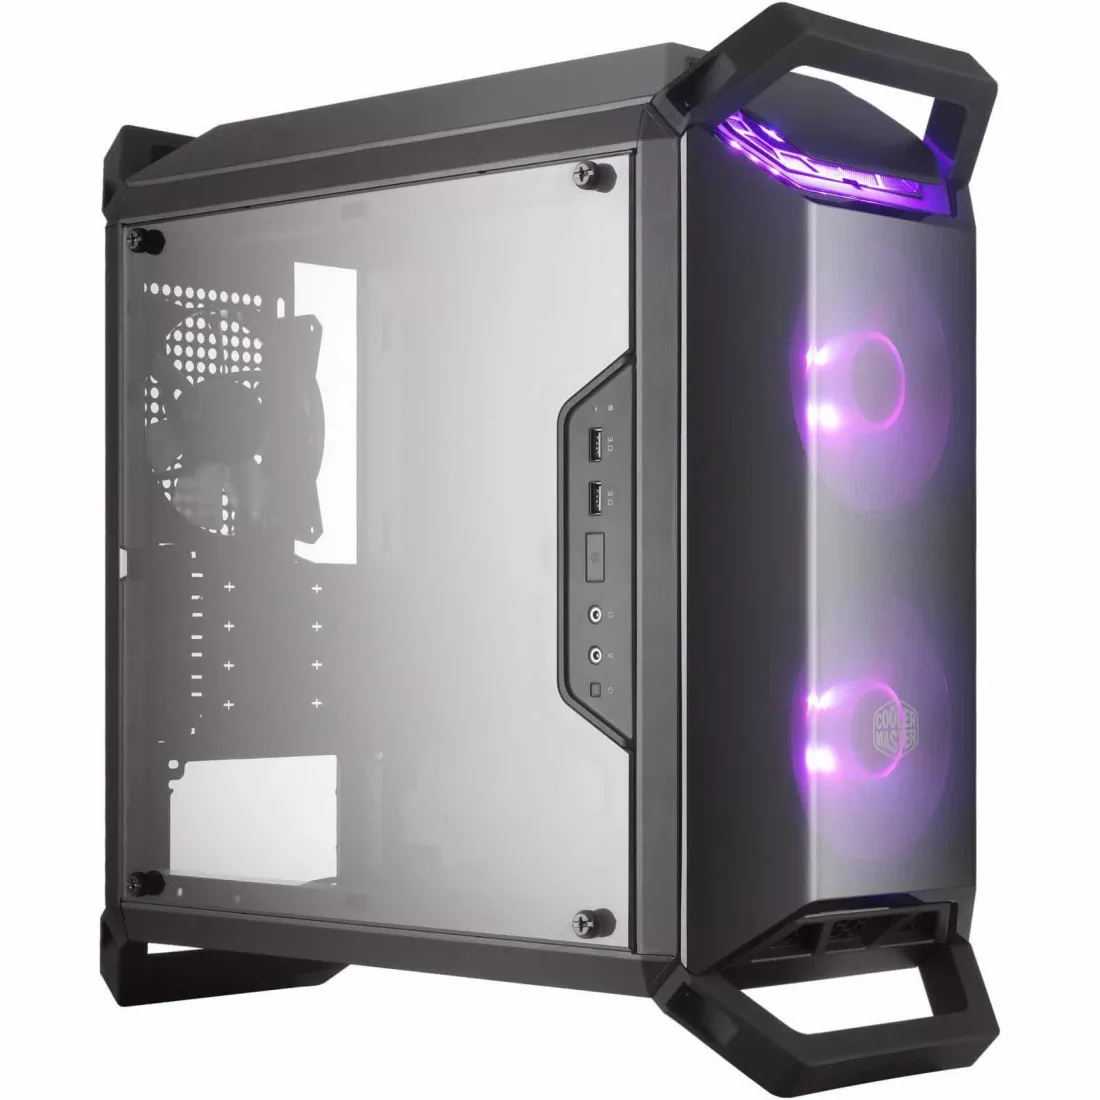 Cooler Master MasterBox Q300P Reviews, Pros and Cons